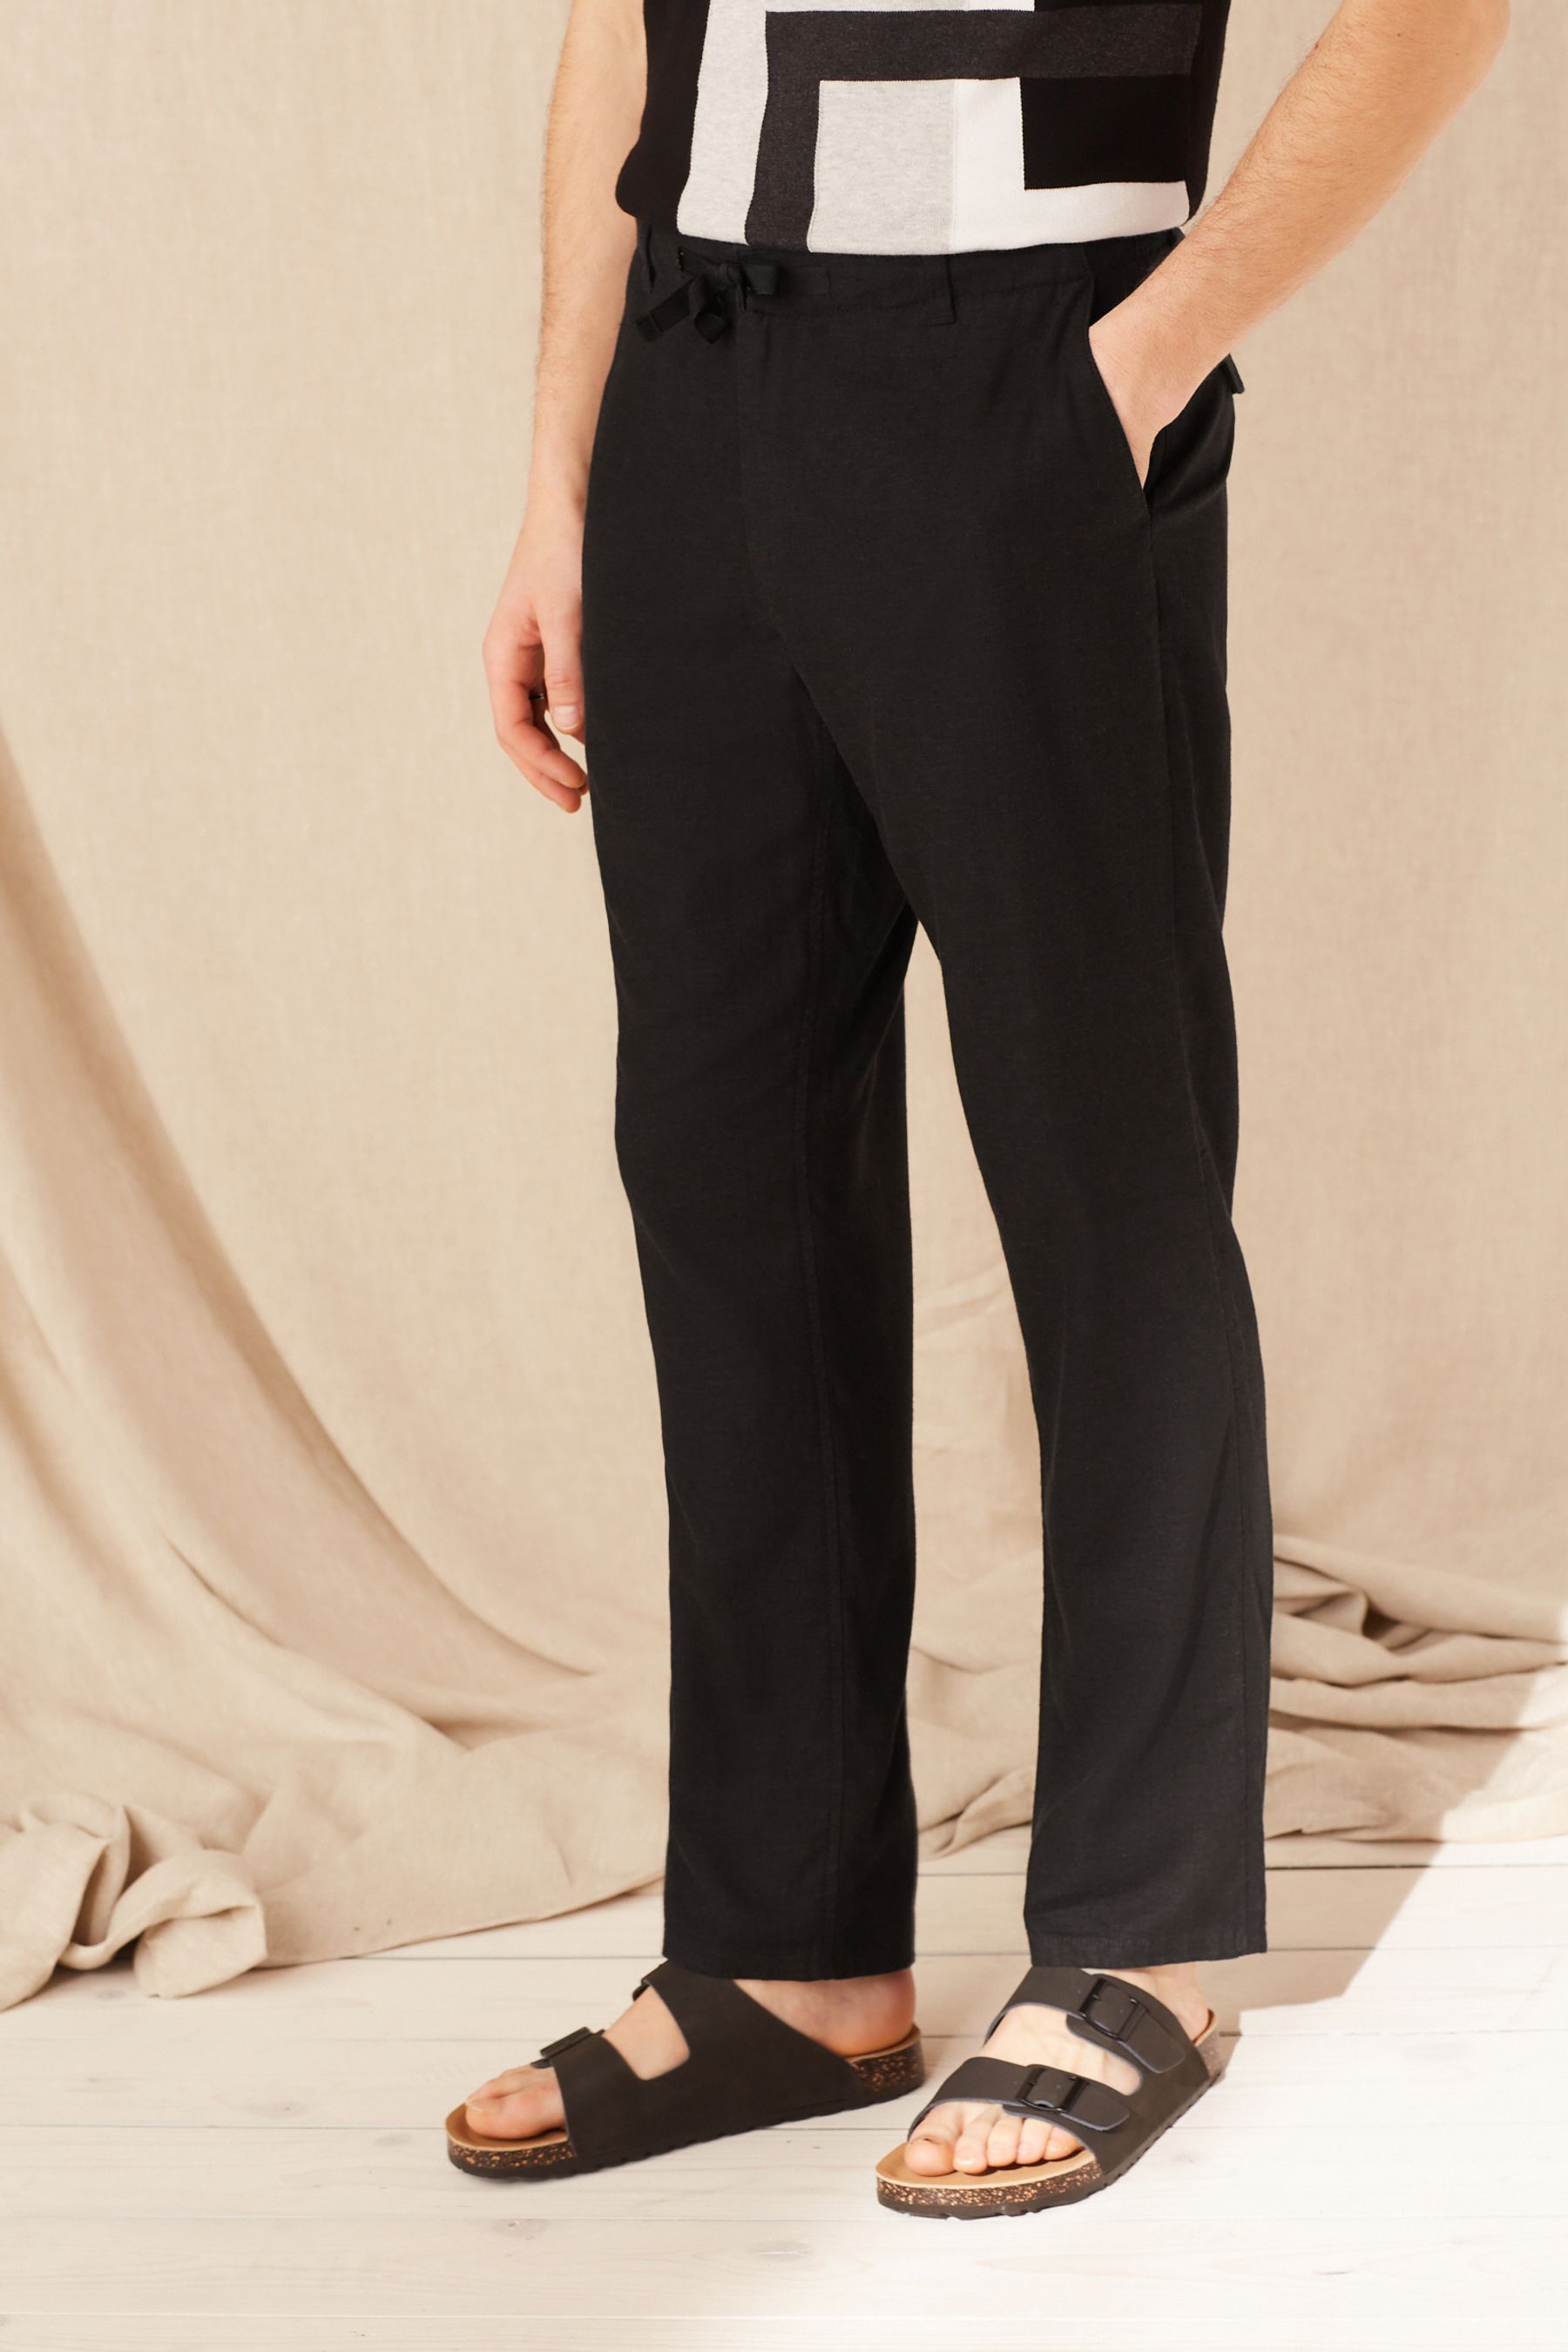 Mens Drawstring Trousers Available in Airforce Blue and Stone